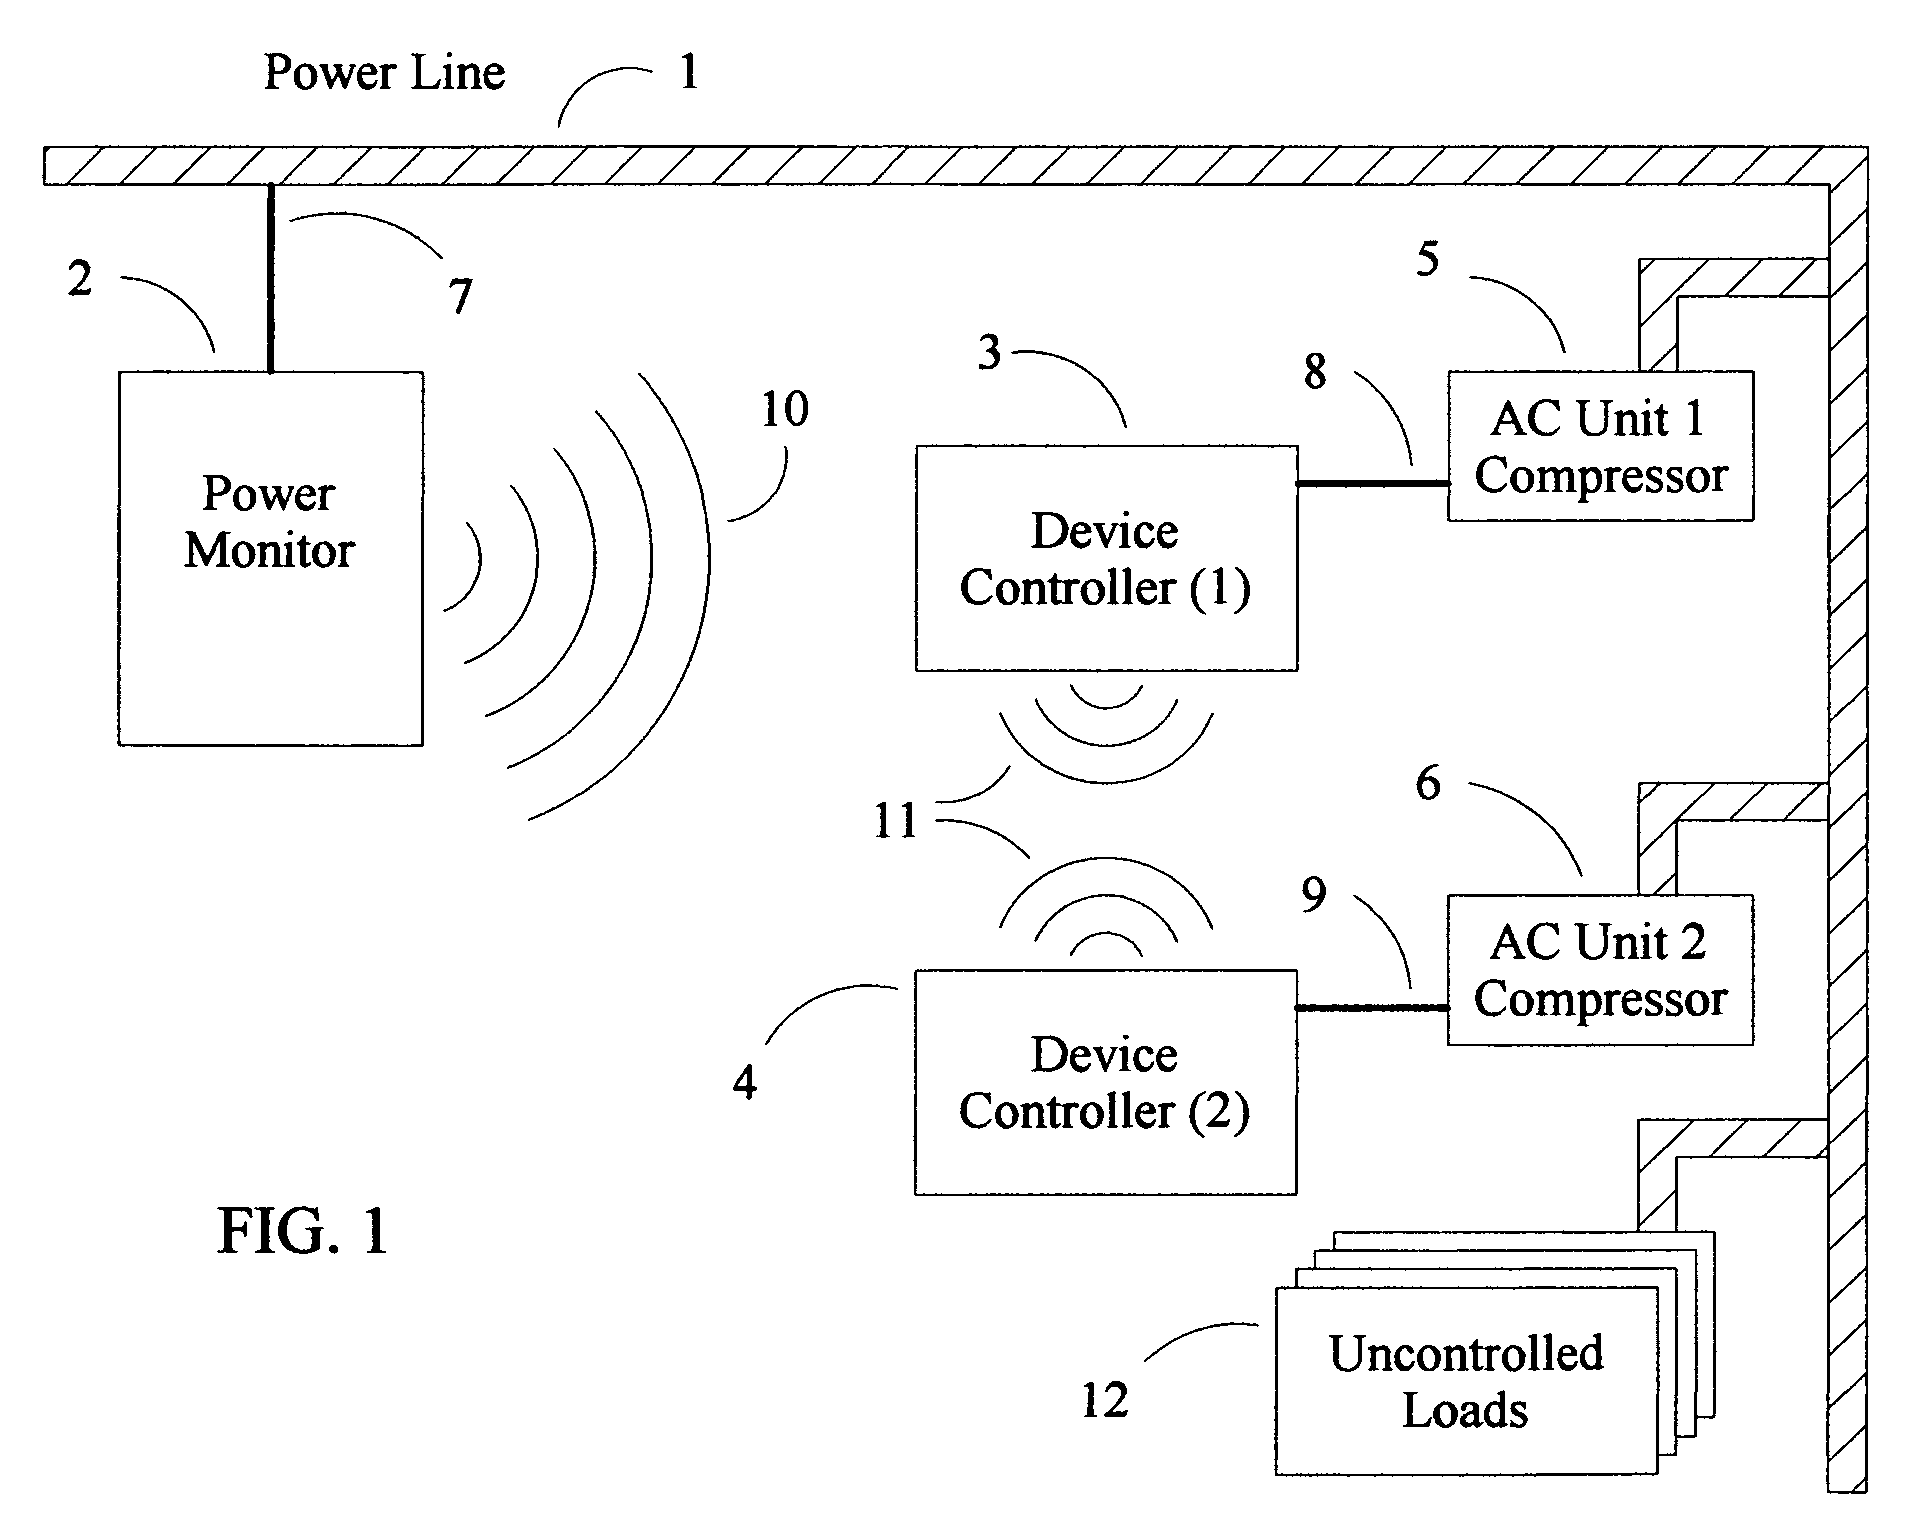 System and methods for maintaining power usage within a set allocation